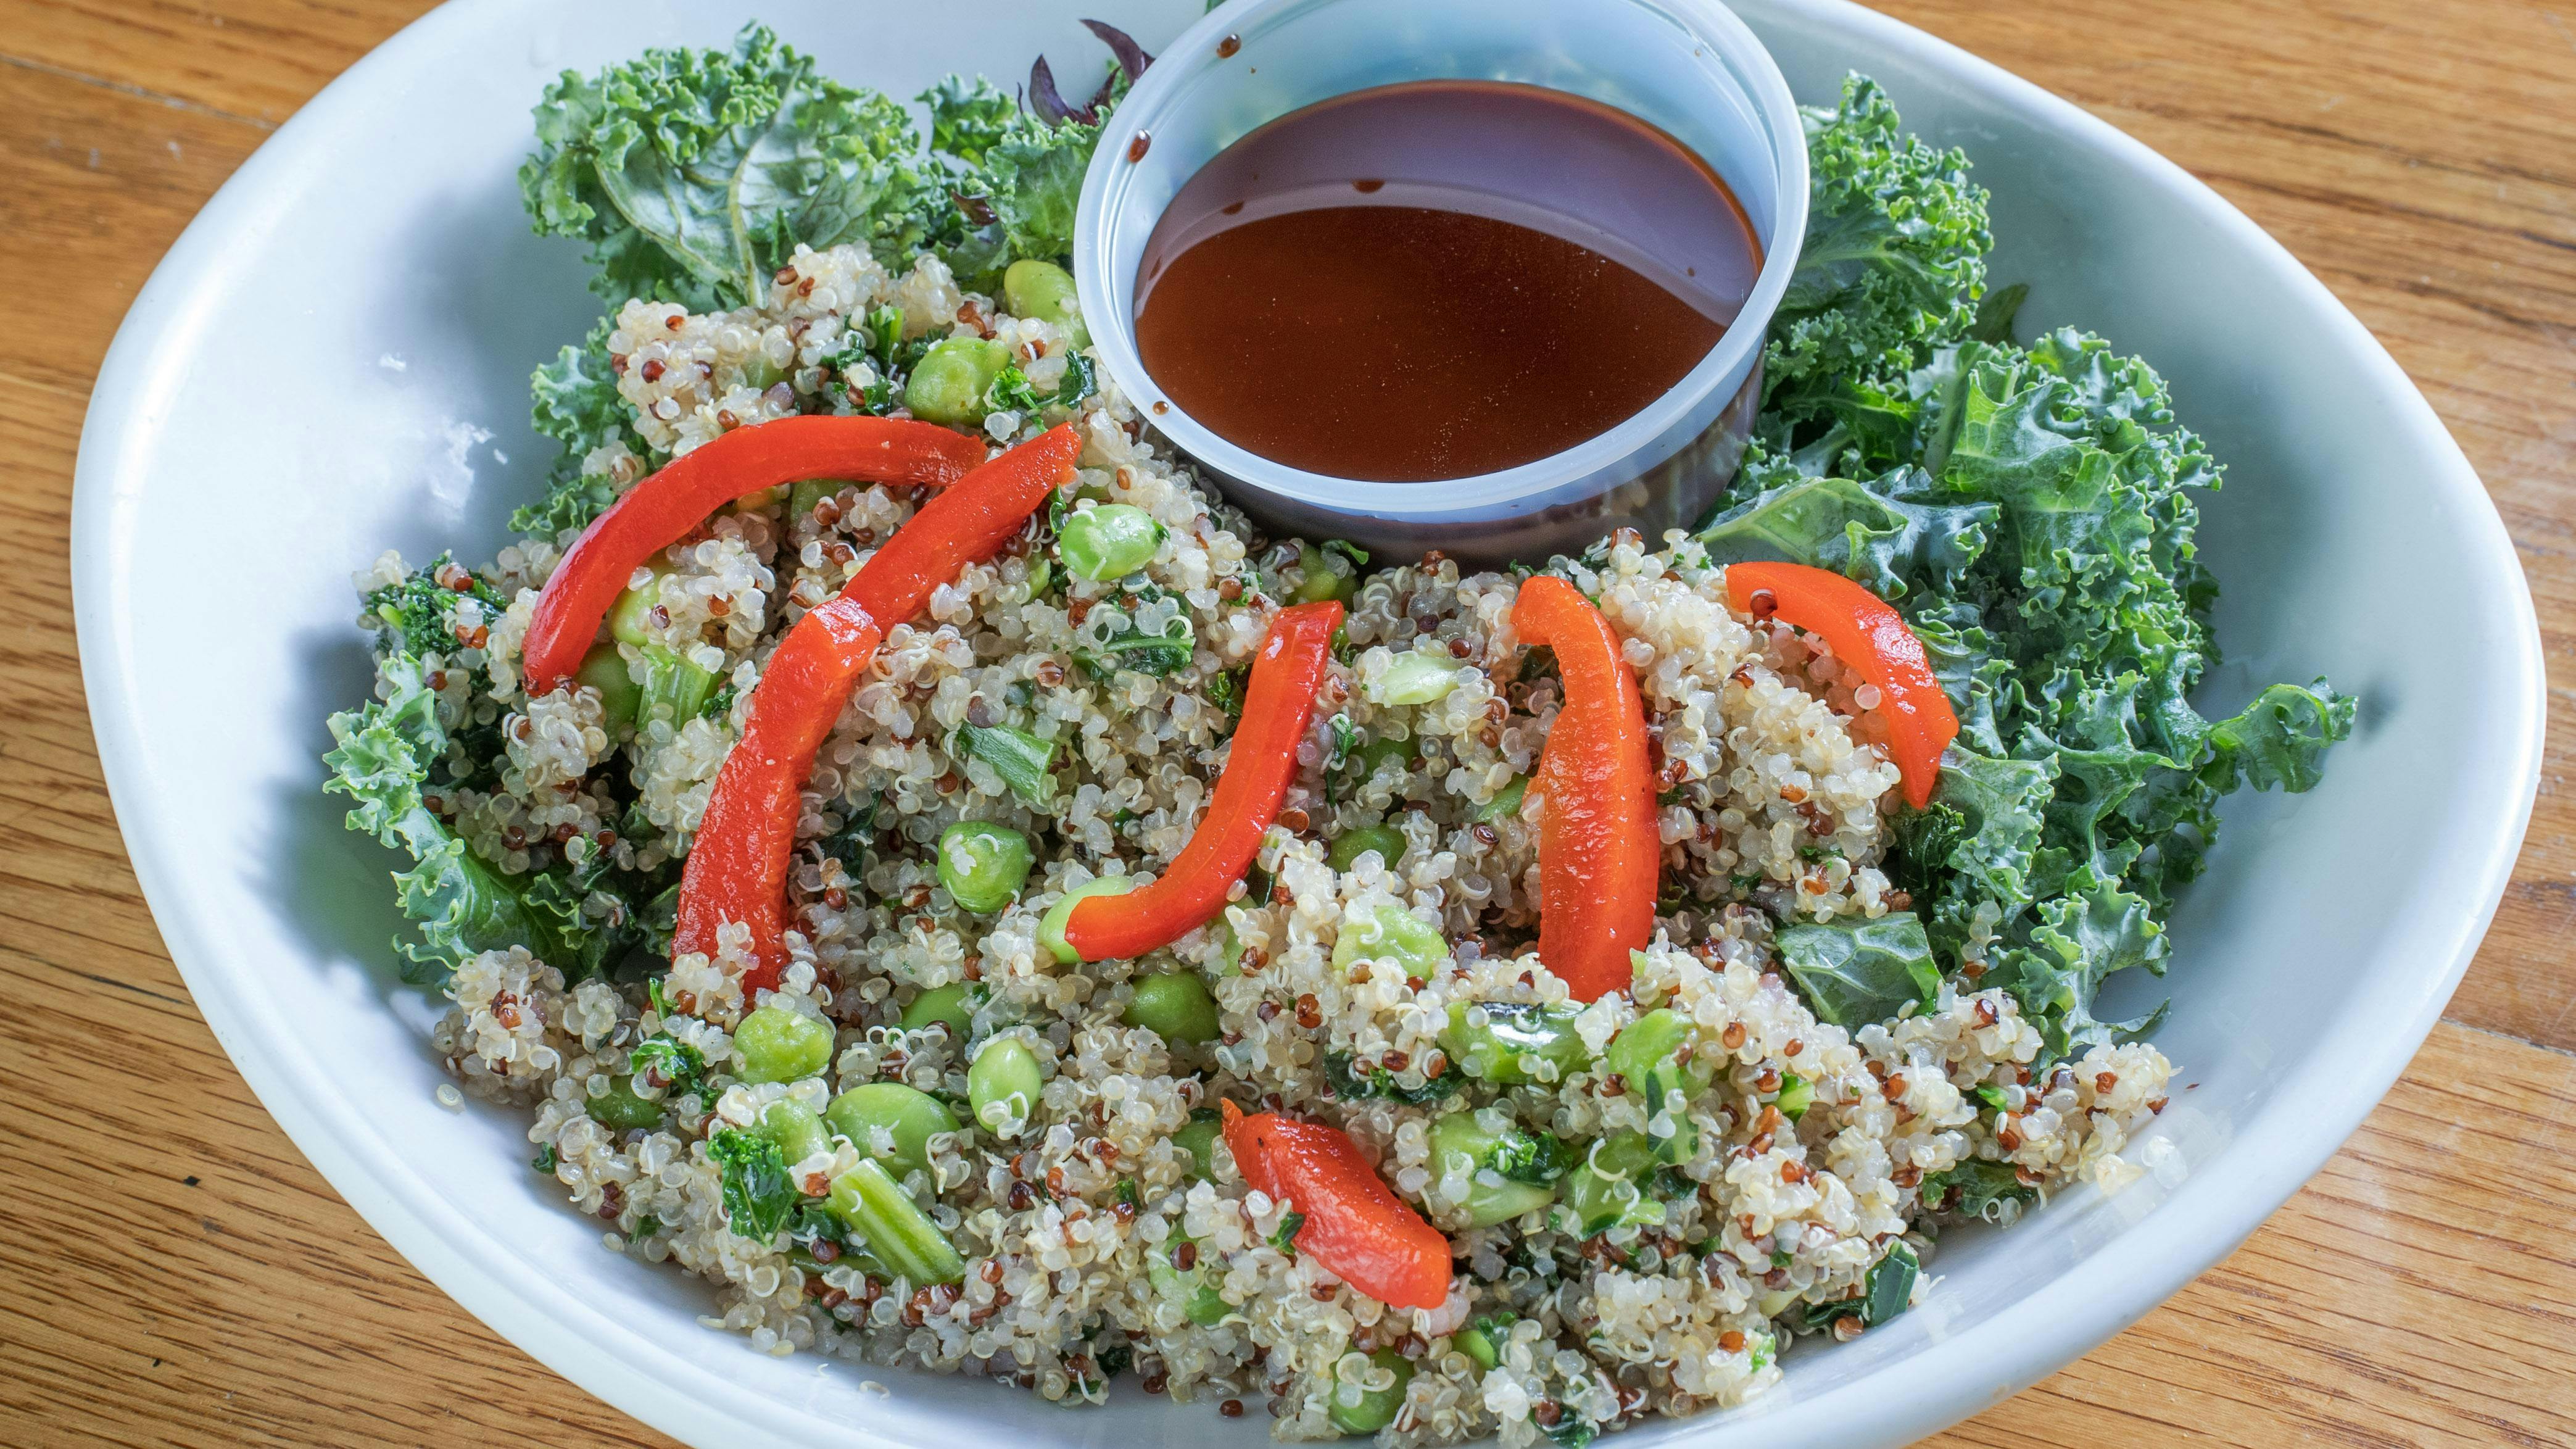 Kale Quinoa Salad from Austin Salad Company - East 6th St in Austin, TX